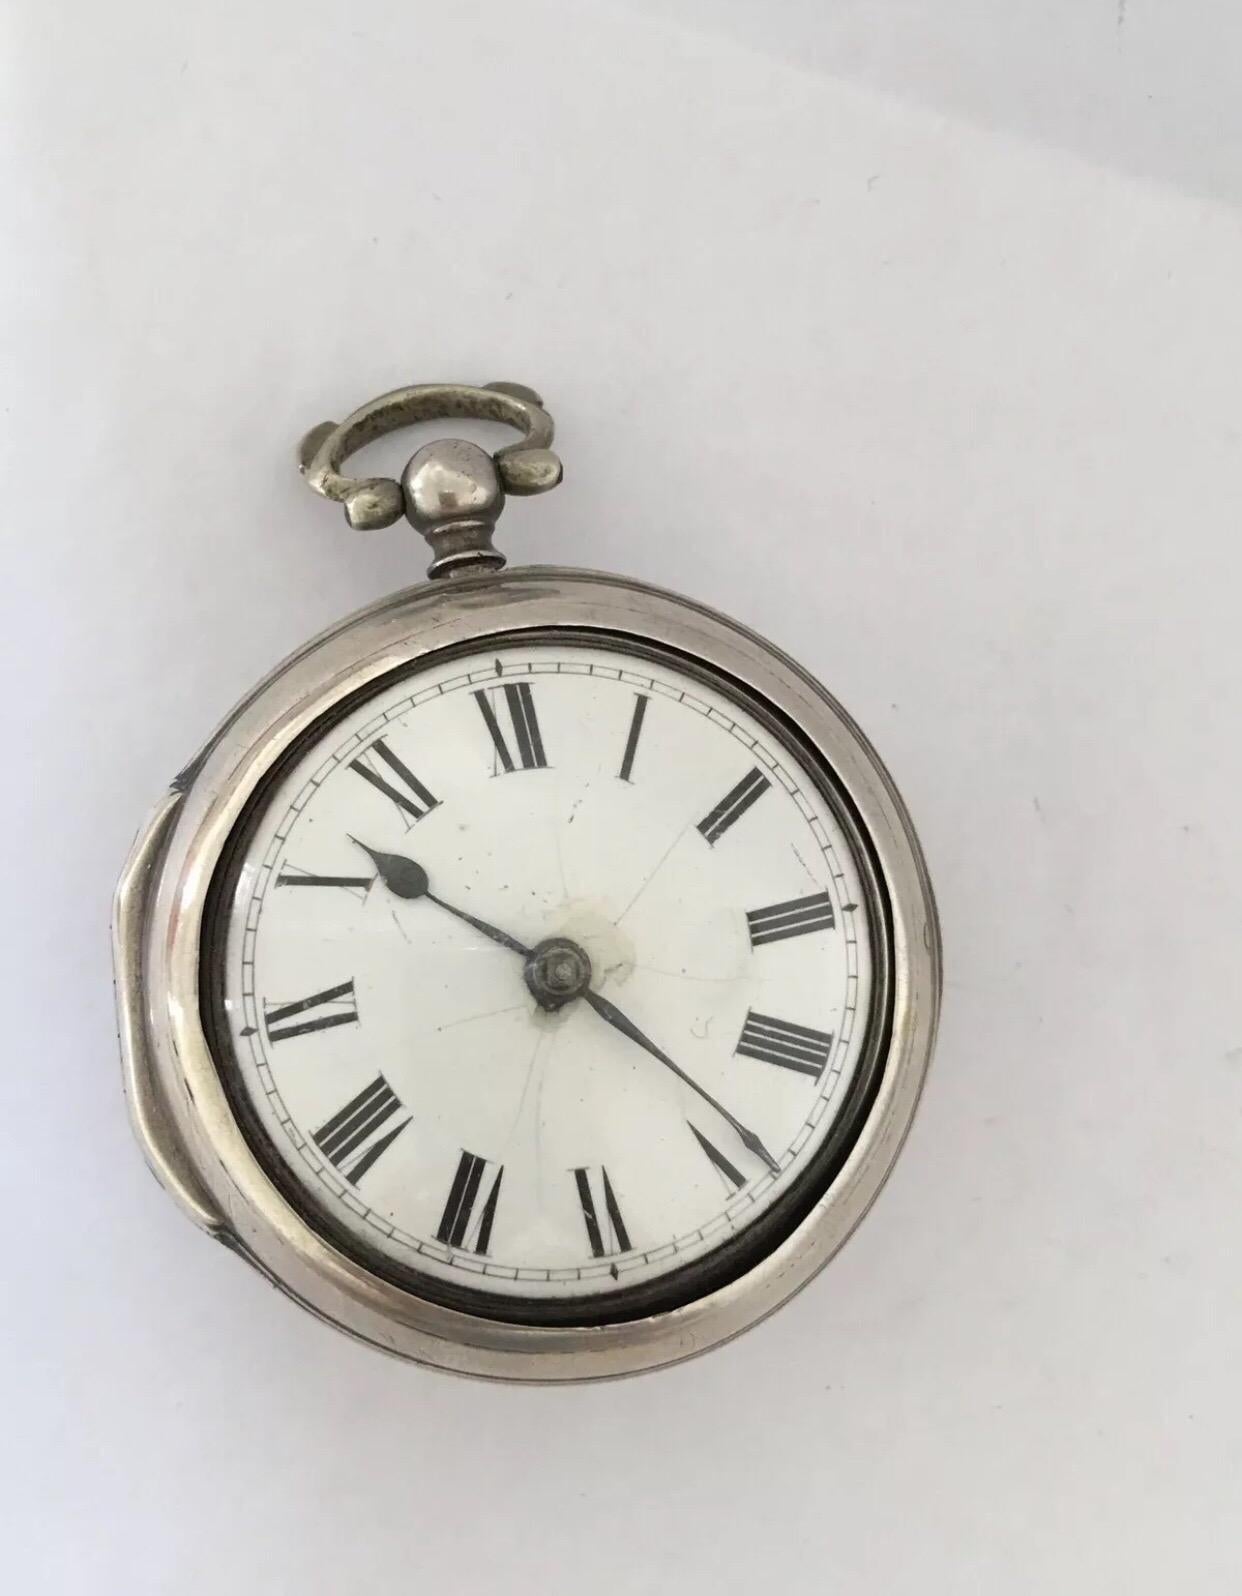 
An Early Verge English Fusee Pocket Watch Signed Richard Smith, Newport c.1730.


This silver pair cased verge, English Fusee pocket watch is in good Working condition, movement is running well. Visible cracks and chipped on the dial.